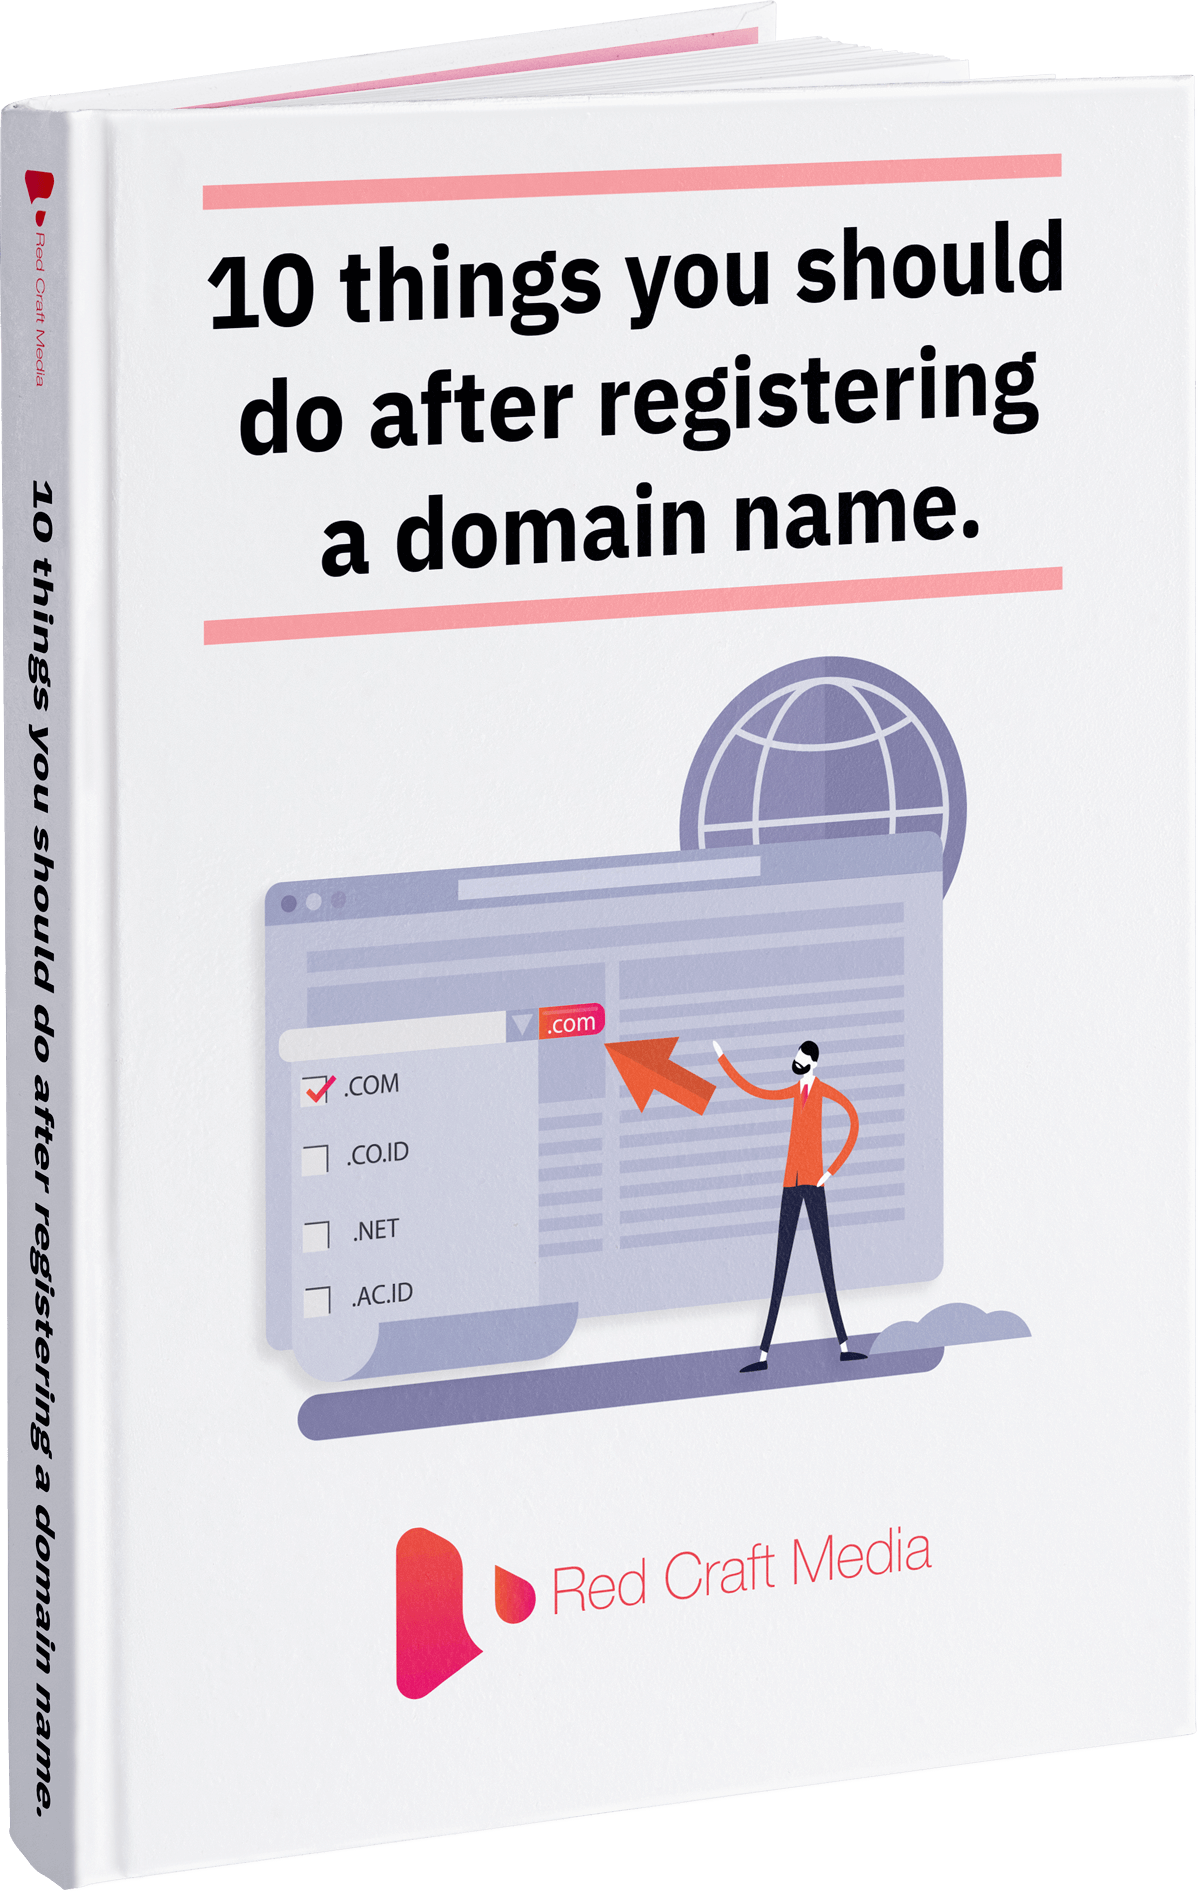 Top 10 Things You Should Do Immediately After Registering a Domain Name.